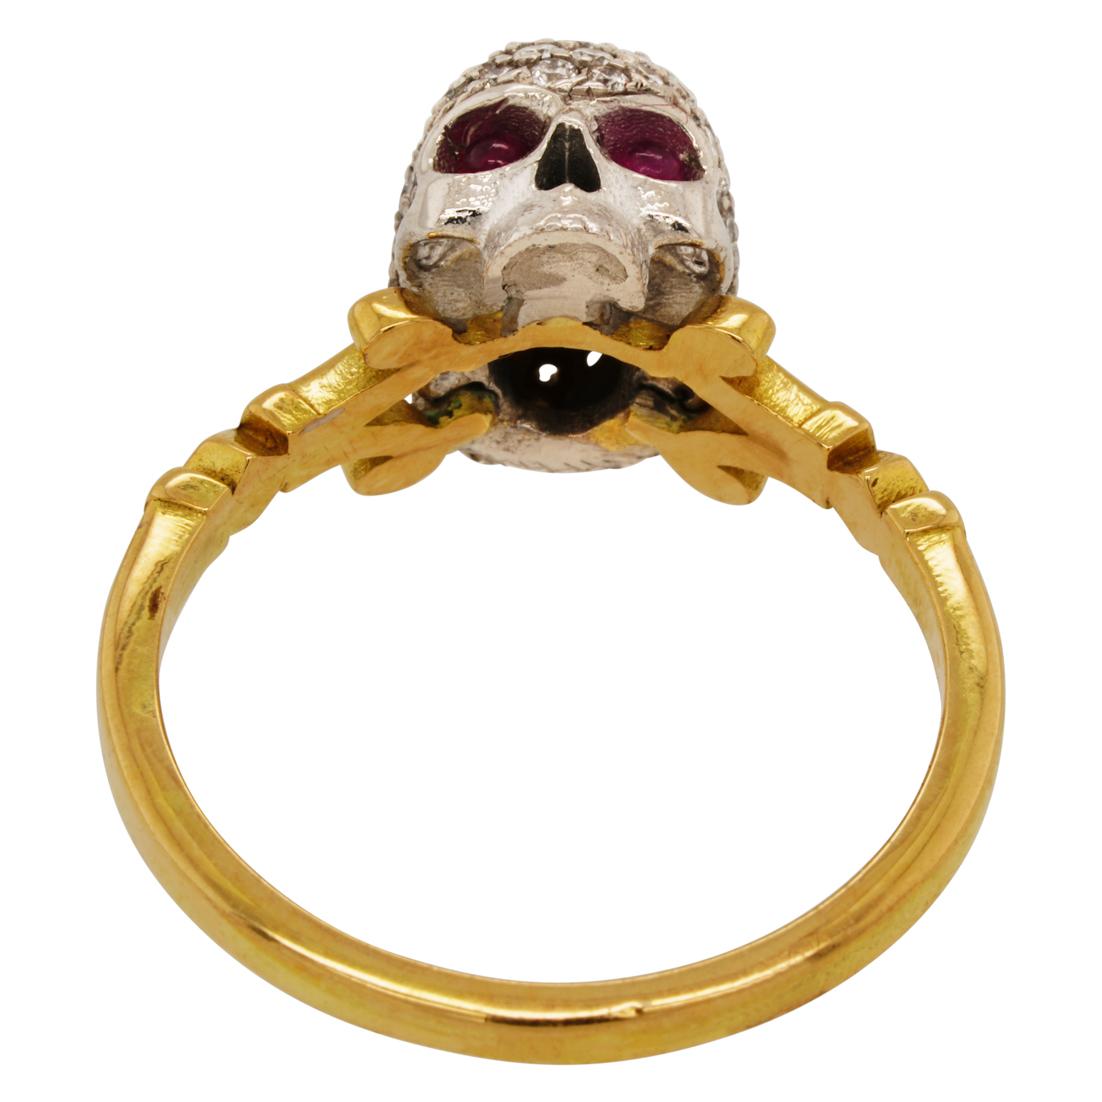 Catacomb Saint Diamond Encrusted Skull Ring in 18kt Gold with Diamonds & Rubies For Sale 6